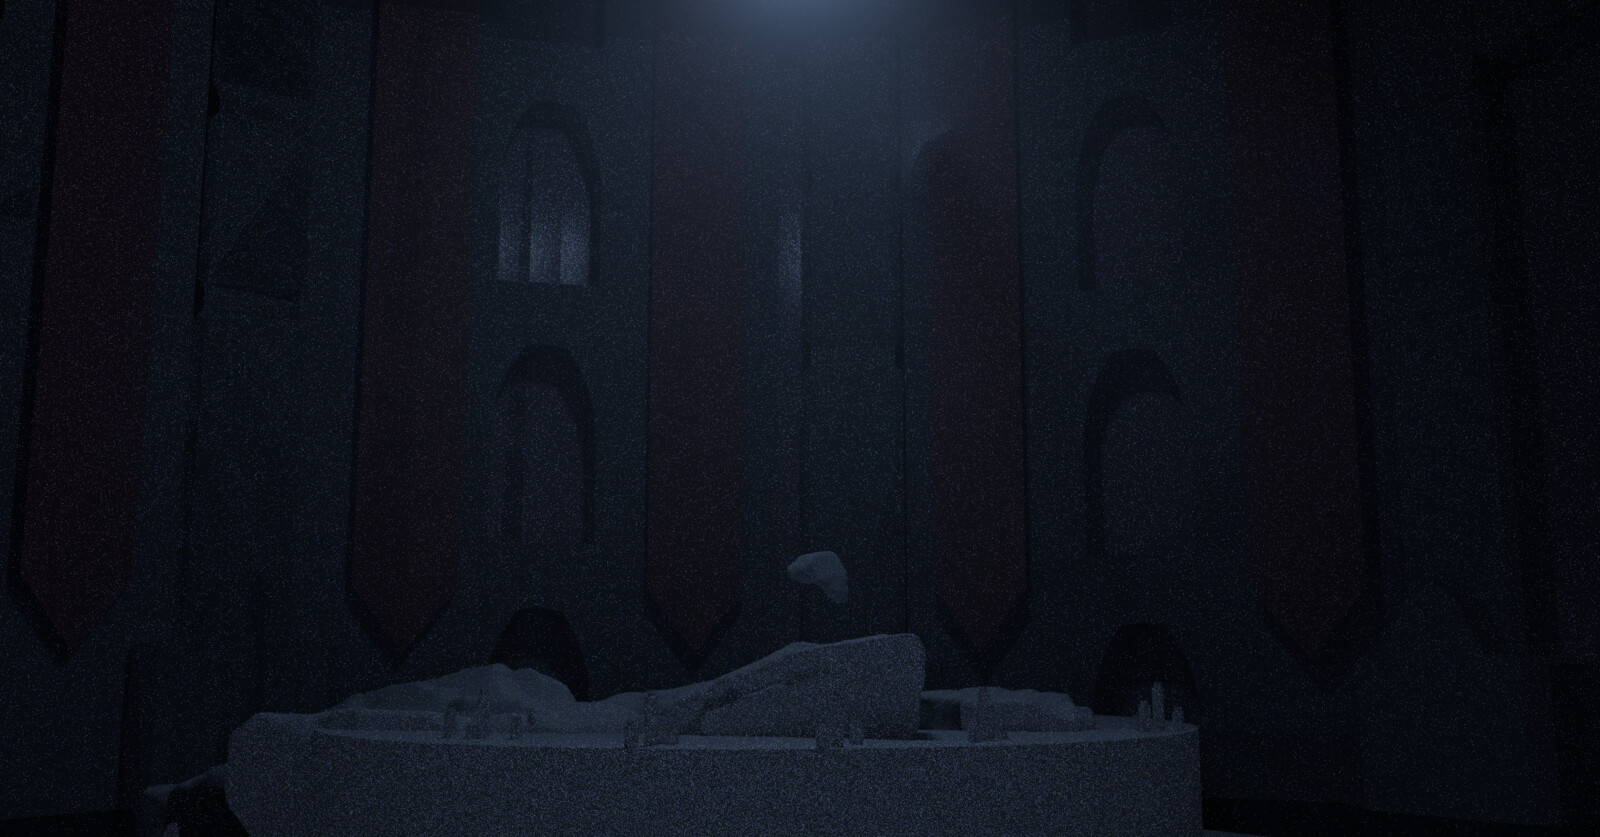 I did a fast background on blender using the same scene